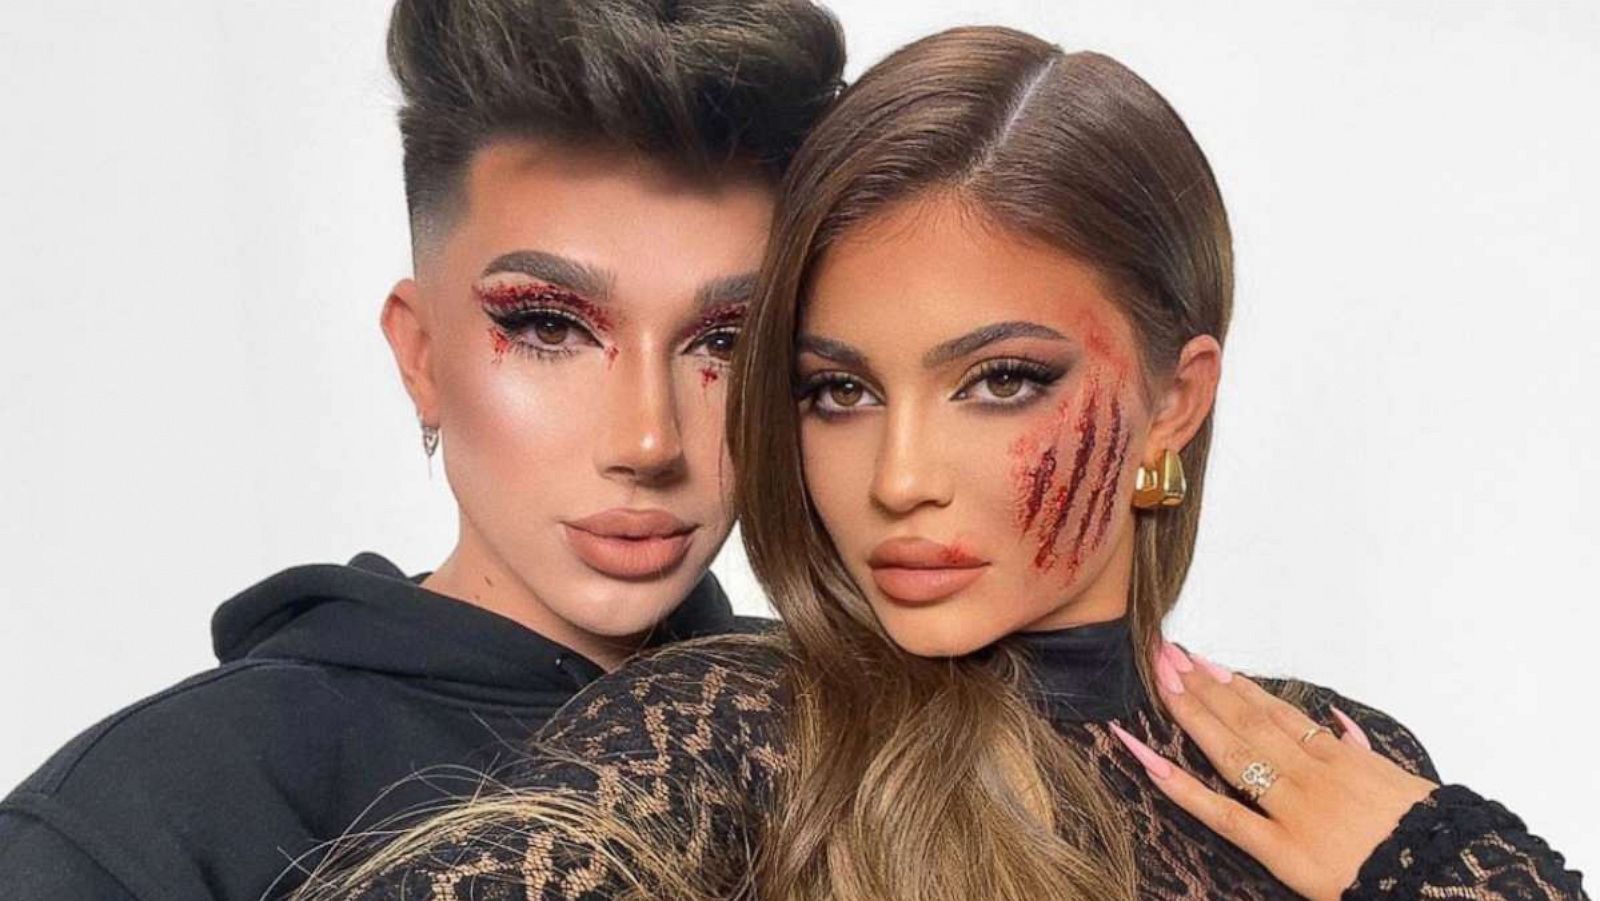 James Charles does Kylie Jenner's Halloween makeup - Good Morning America